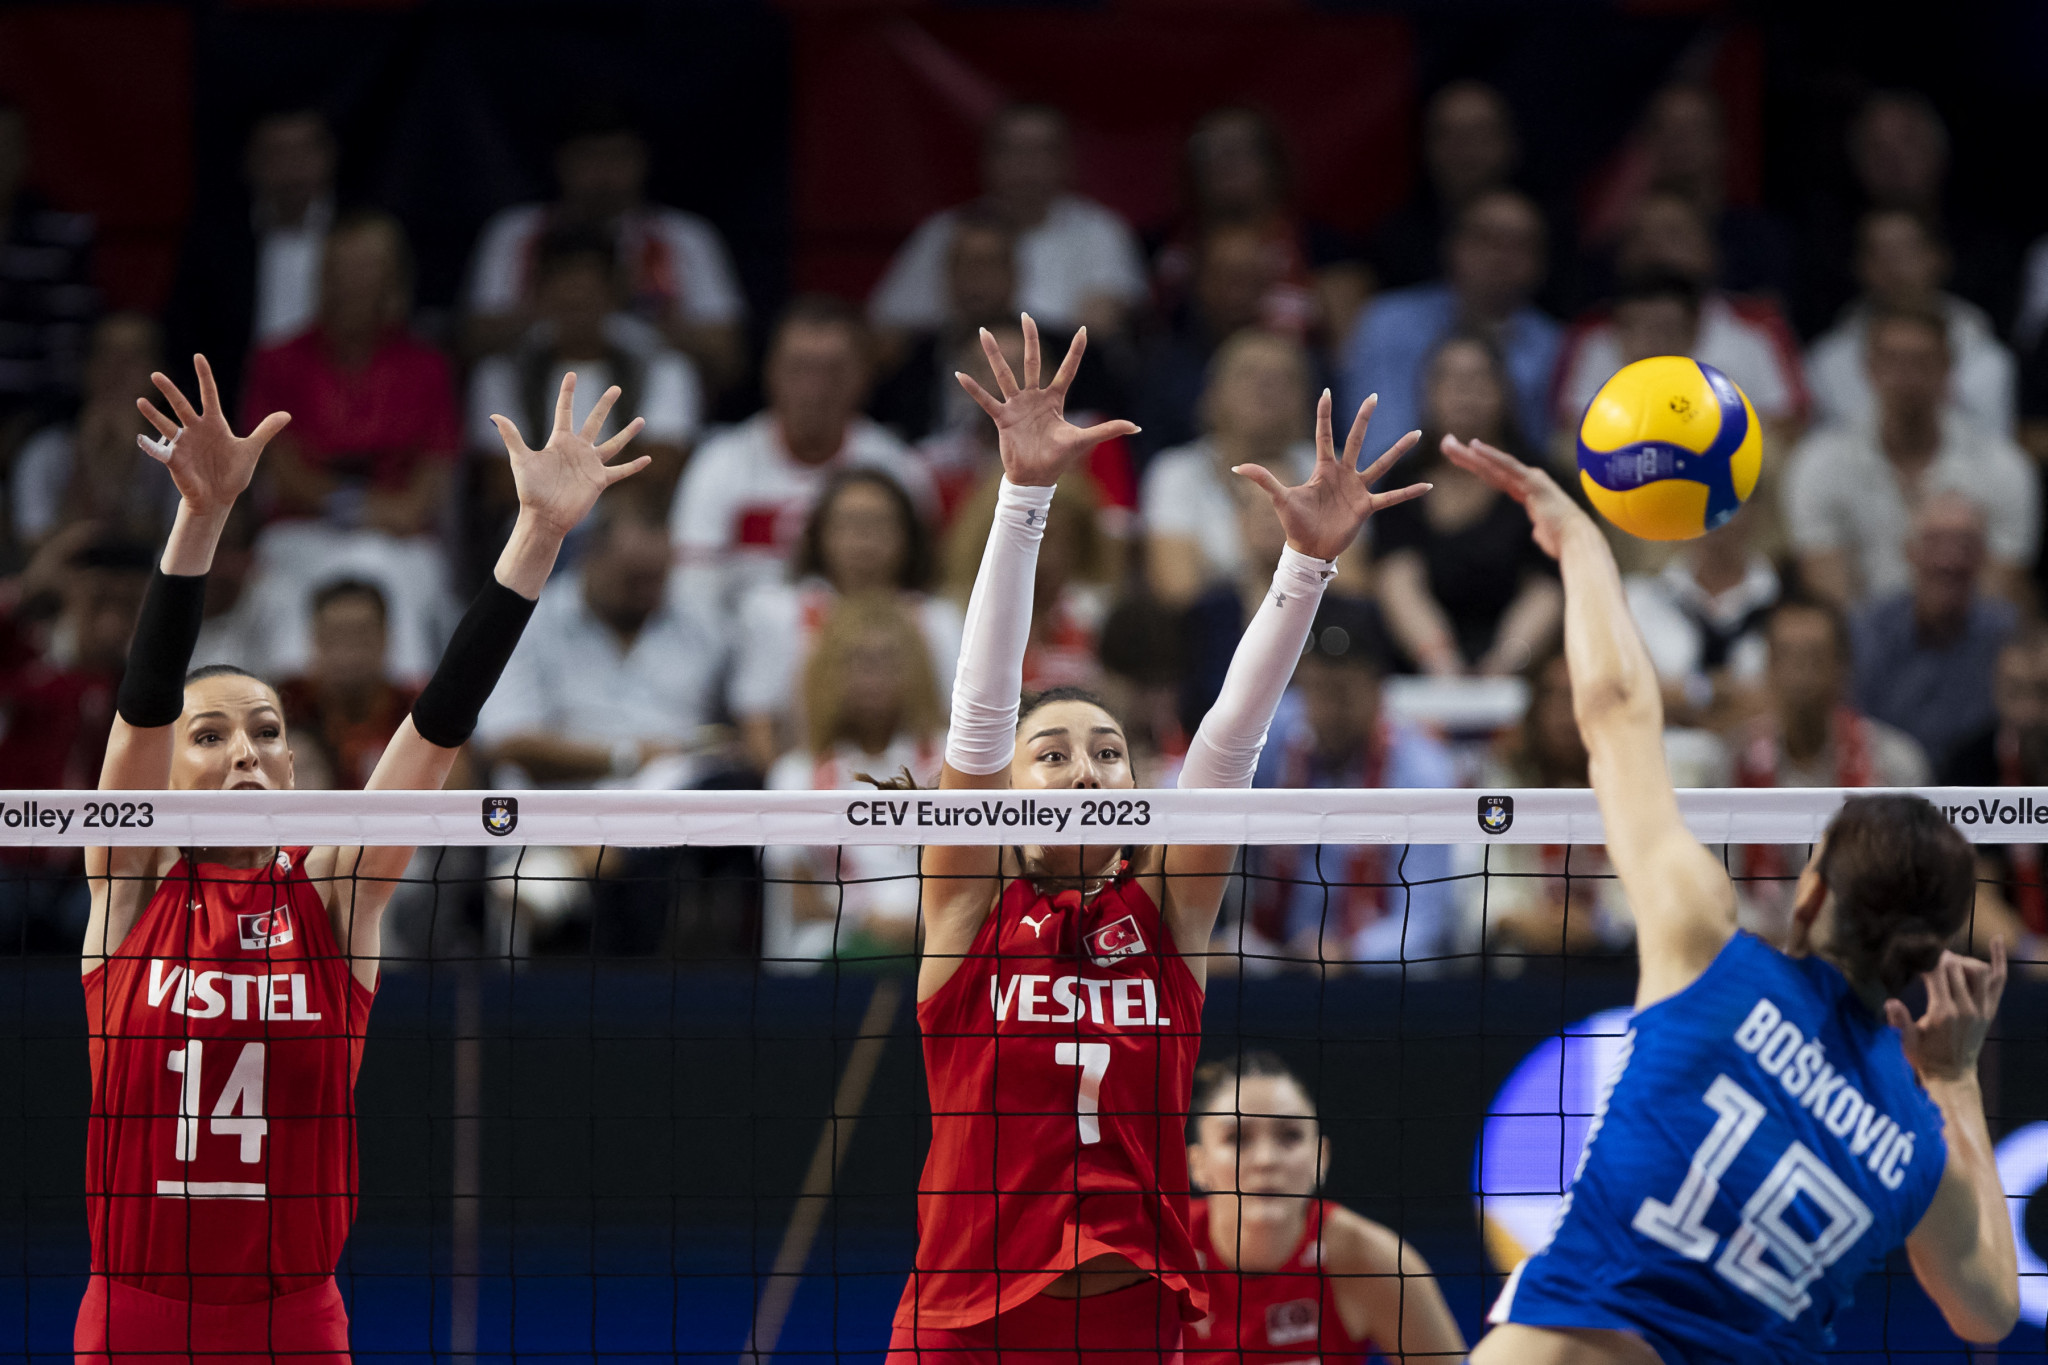 Turkey, playing in red, defeated Serbia to win the Women's European Volleyball Championship title for the first time ©Getty Images 